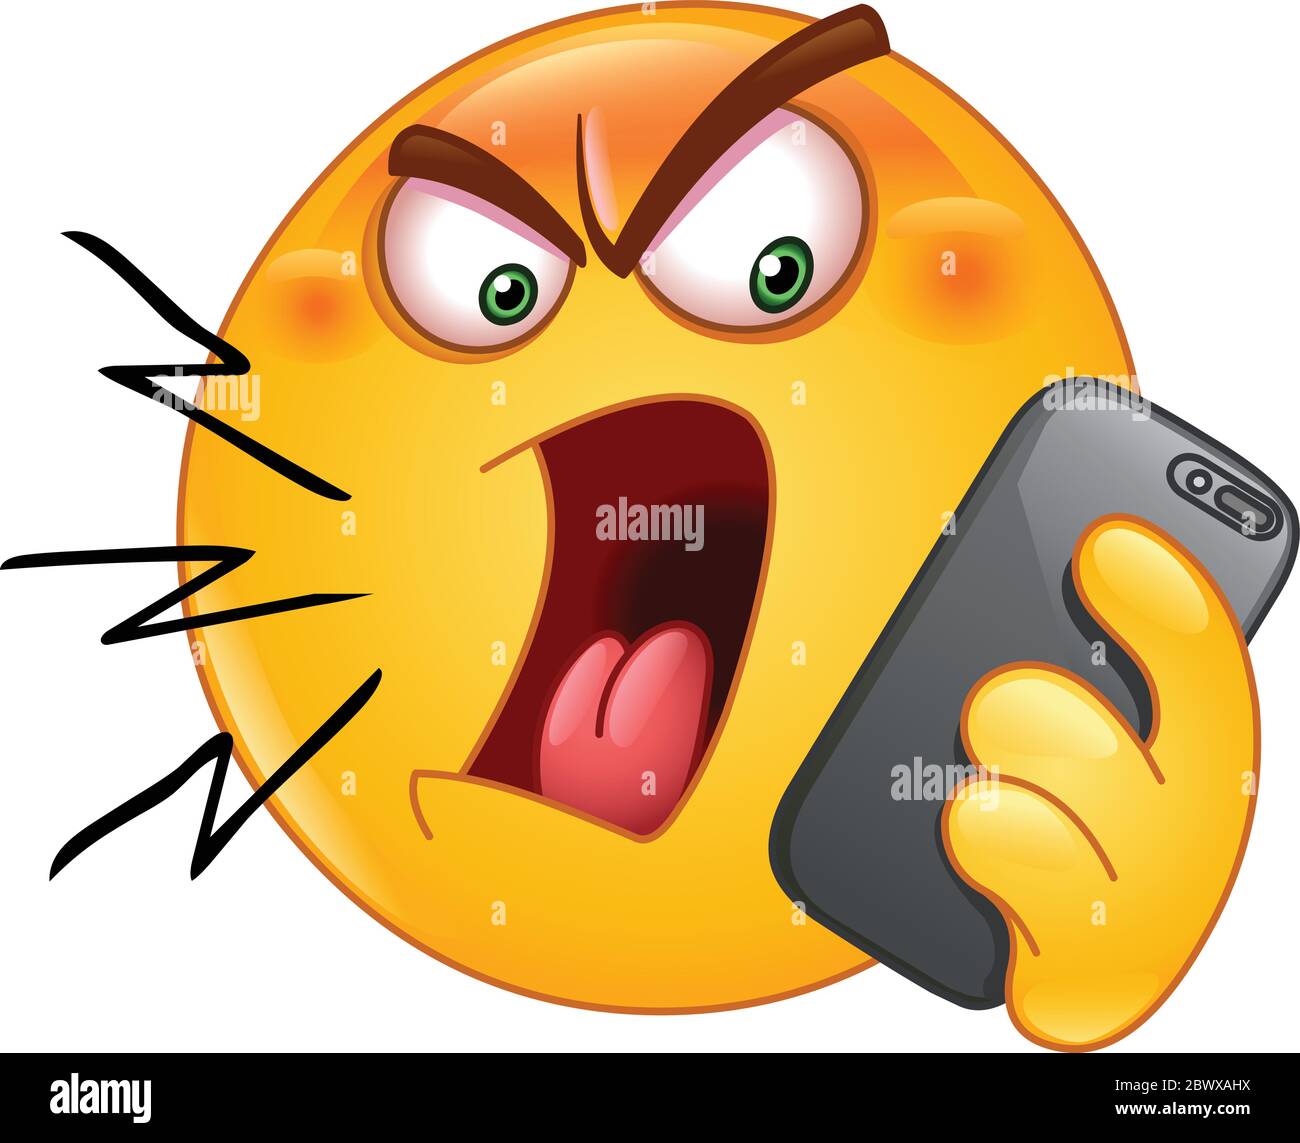 Angry emoji emoticon shouting on the phone Stock Vector